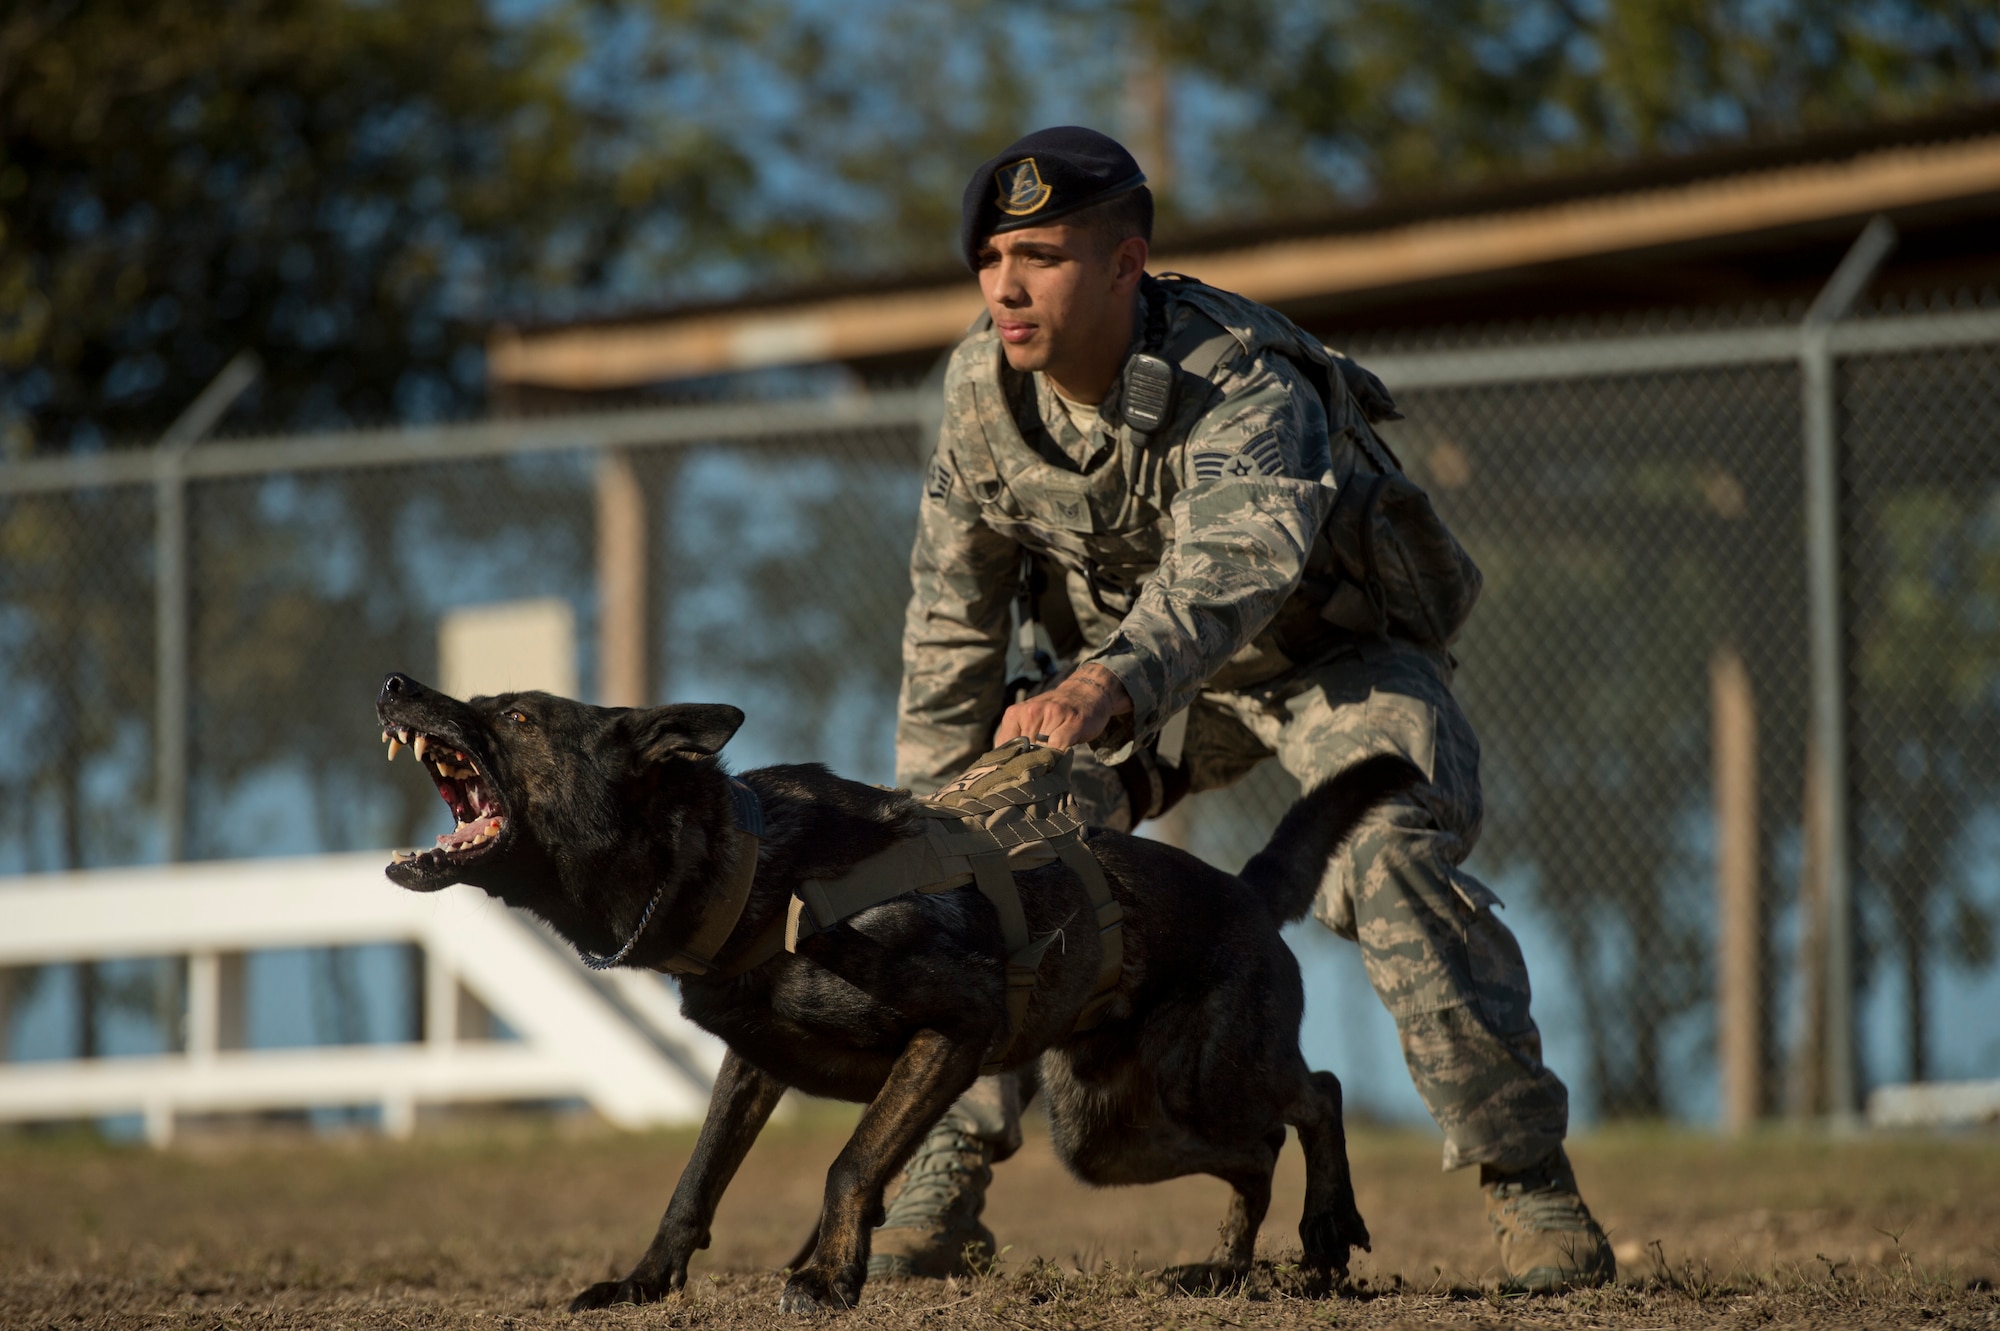 Staff Sgt. Mark Devine prepares to release JJany during a controlled aggression exercise at Joint Base San Antonio-Lackland. Devine is a , a military working dog handler assigned to the 802nd Security Forces Squadron. Military working dog handlers assigned to JBSA-Lackland fulfill daily law enforcement requirements or train to remain mission-ready. (U.S. Air force photo/Staff Sgt. Vernon Young Jr.)